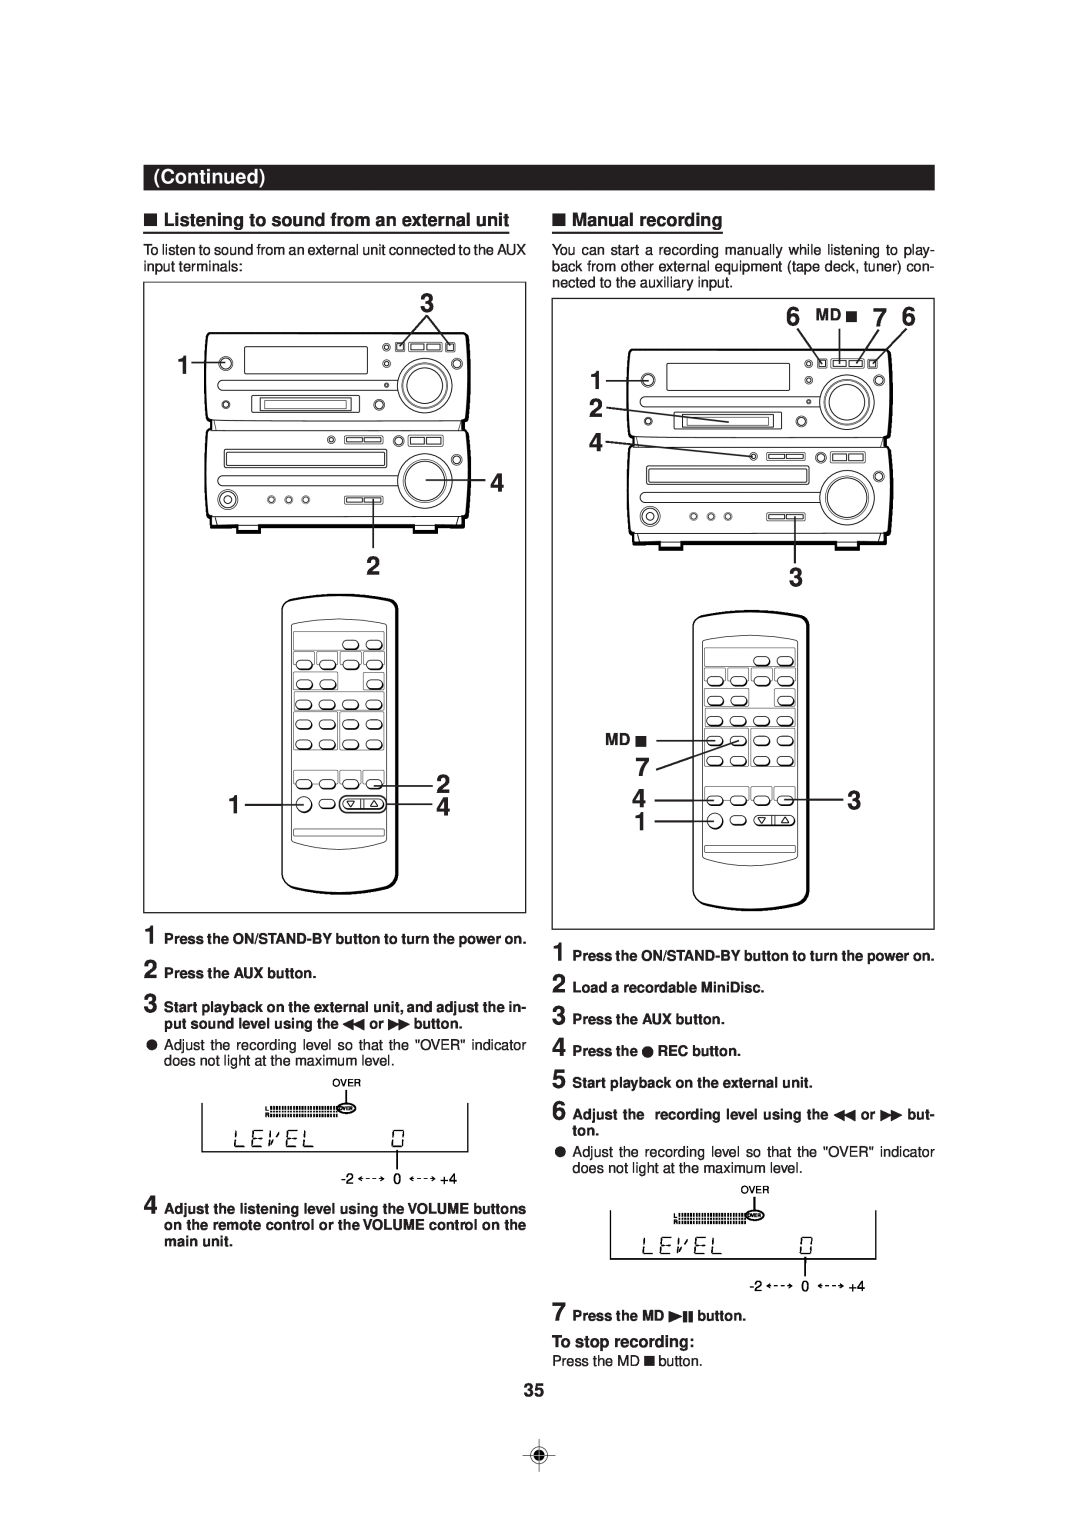 Sharp MD-MX30 operation manual Listening to sound from an external unit, Manual recording 